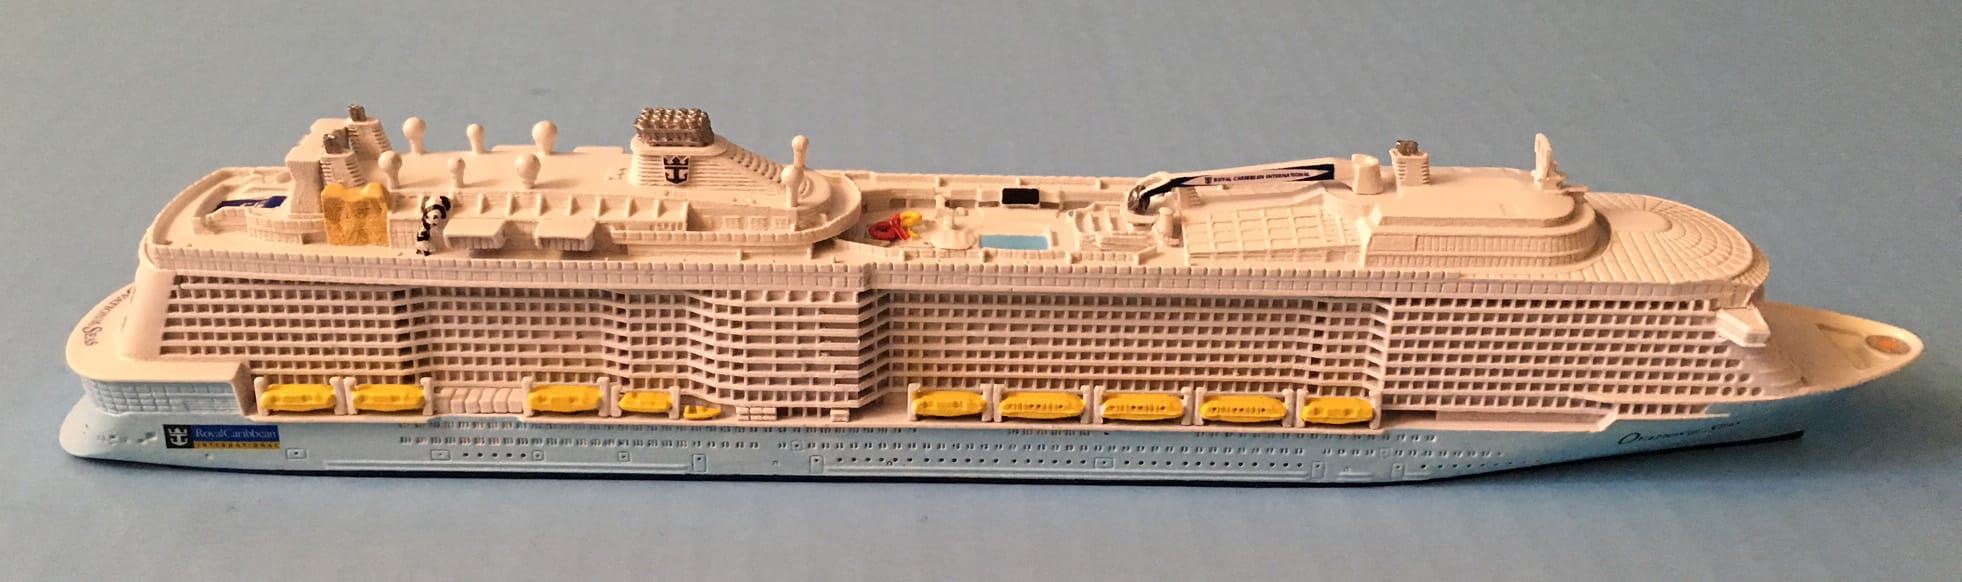 Ovation  of the Seas cruise ship model  1:1250 scale Picture